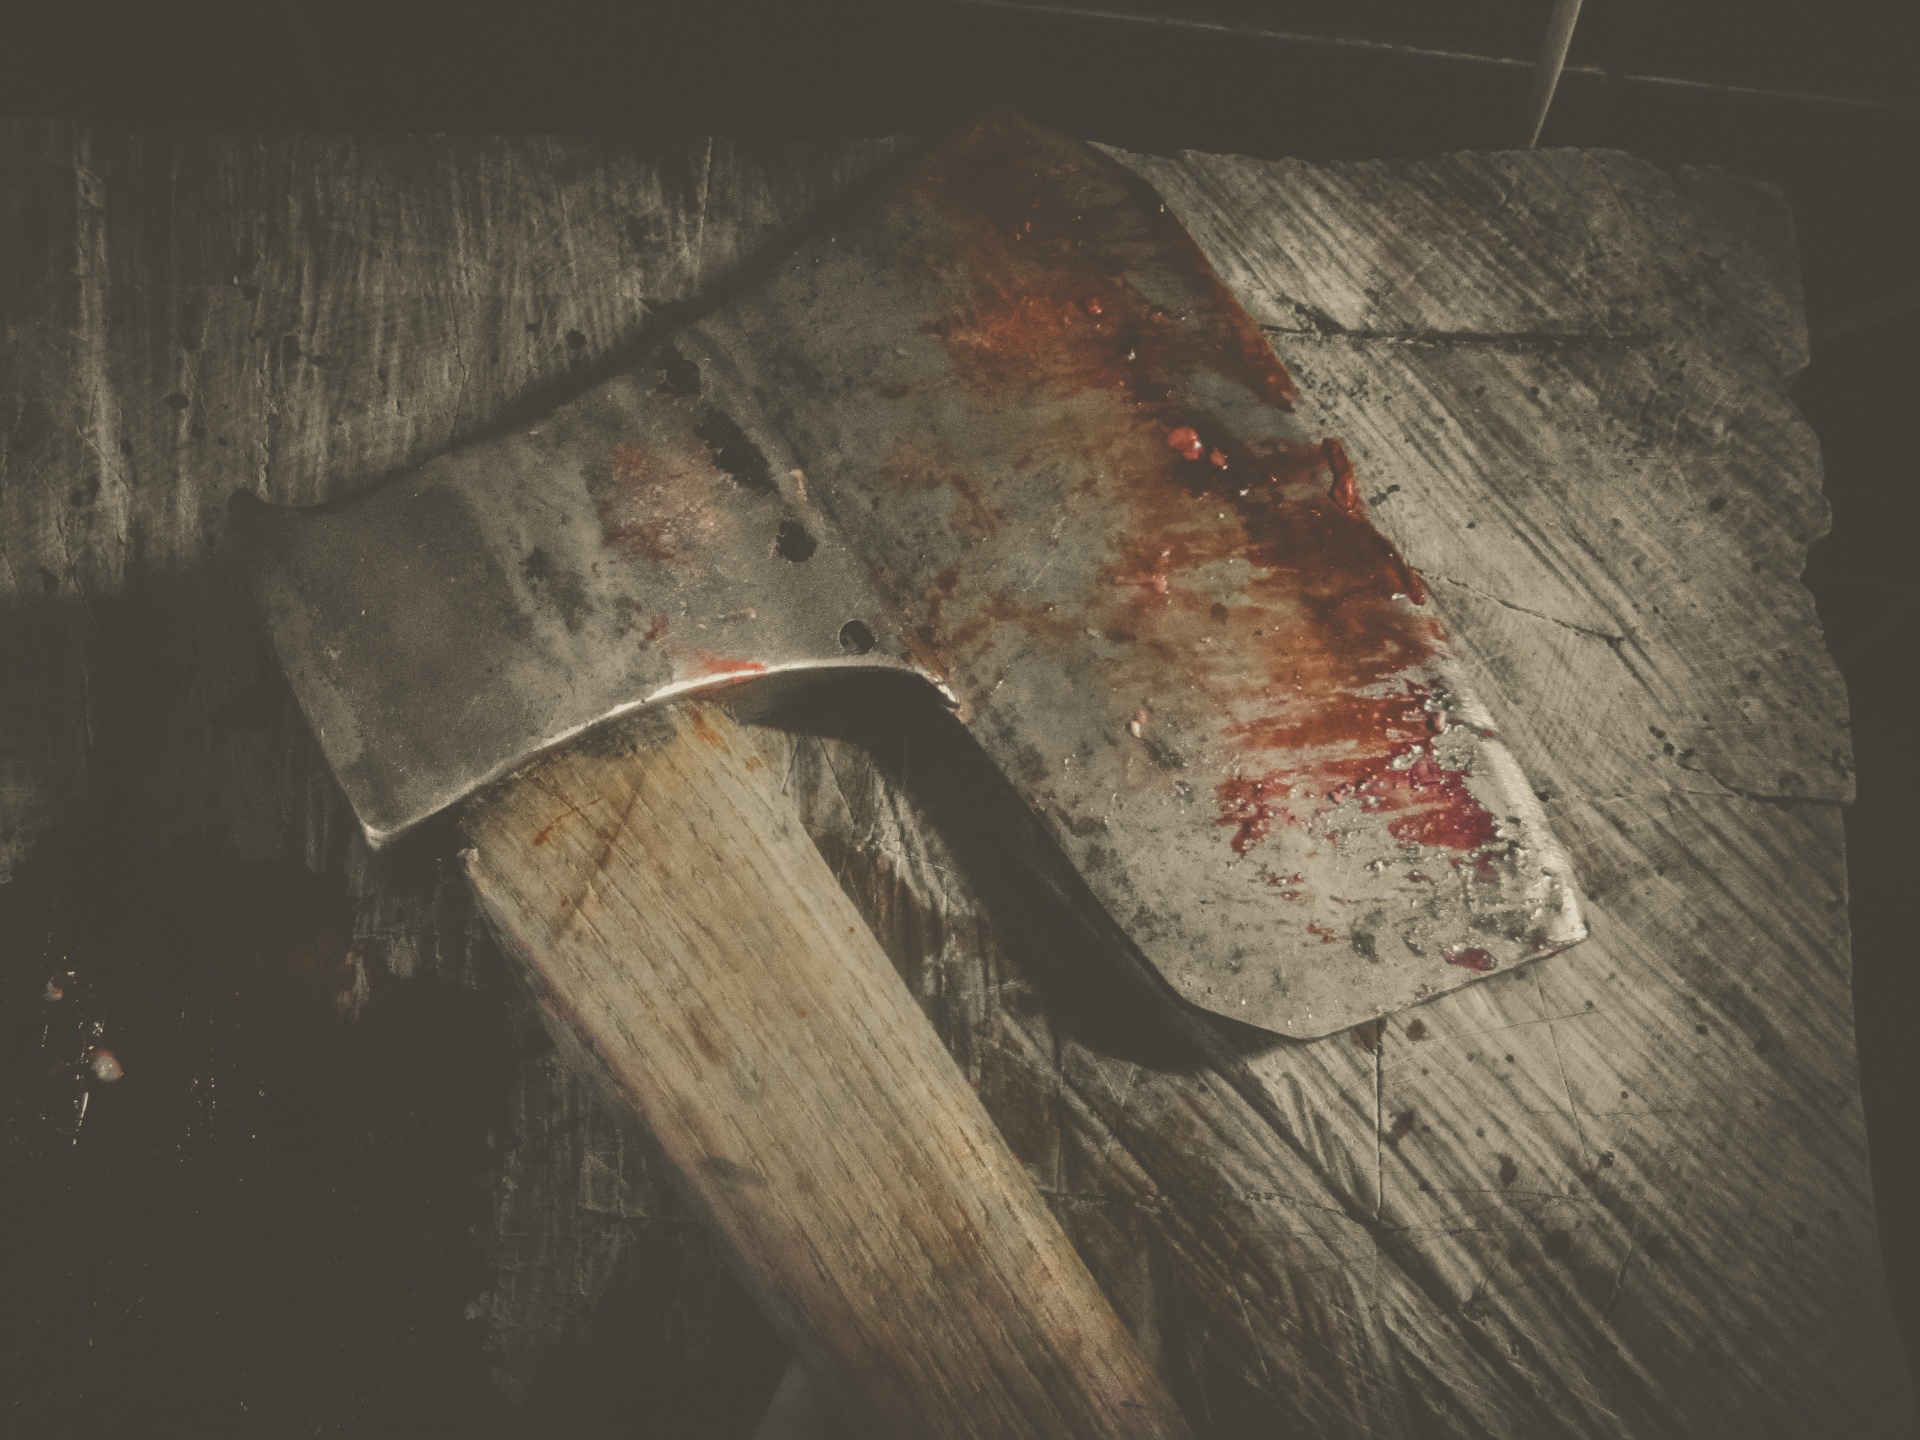 Spooky ax with blood. Ideal for Halloween